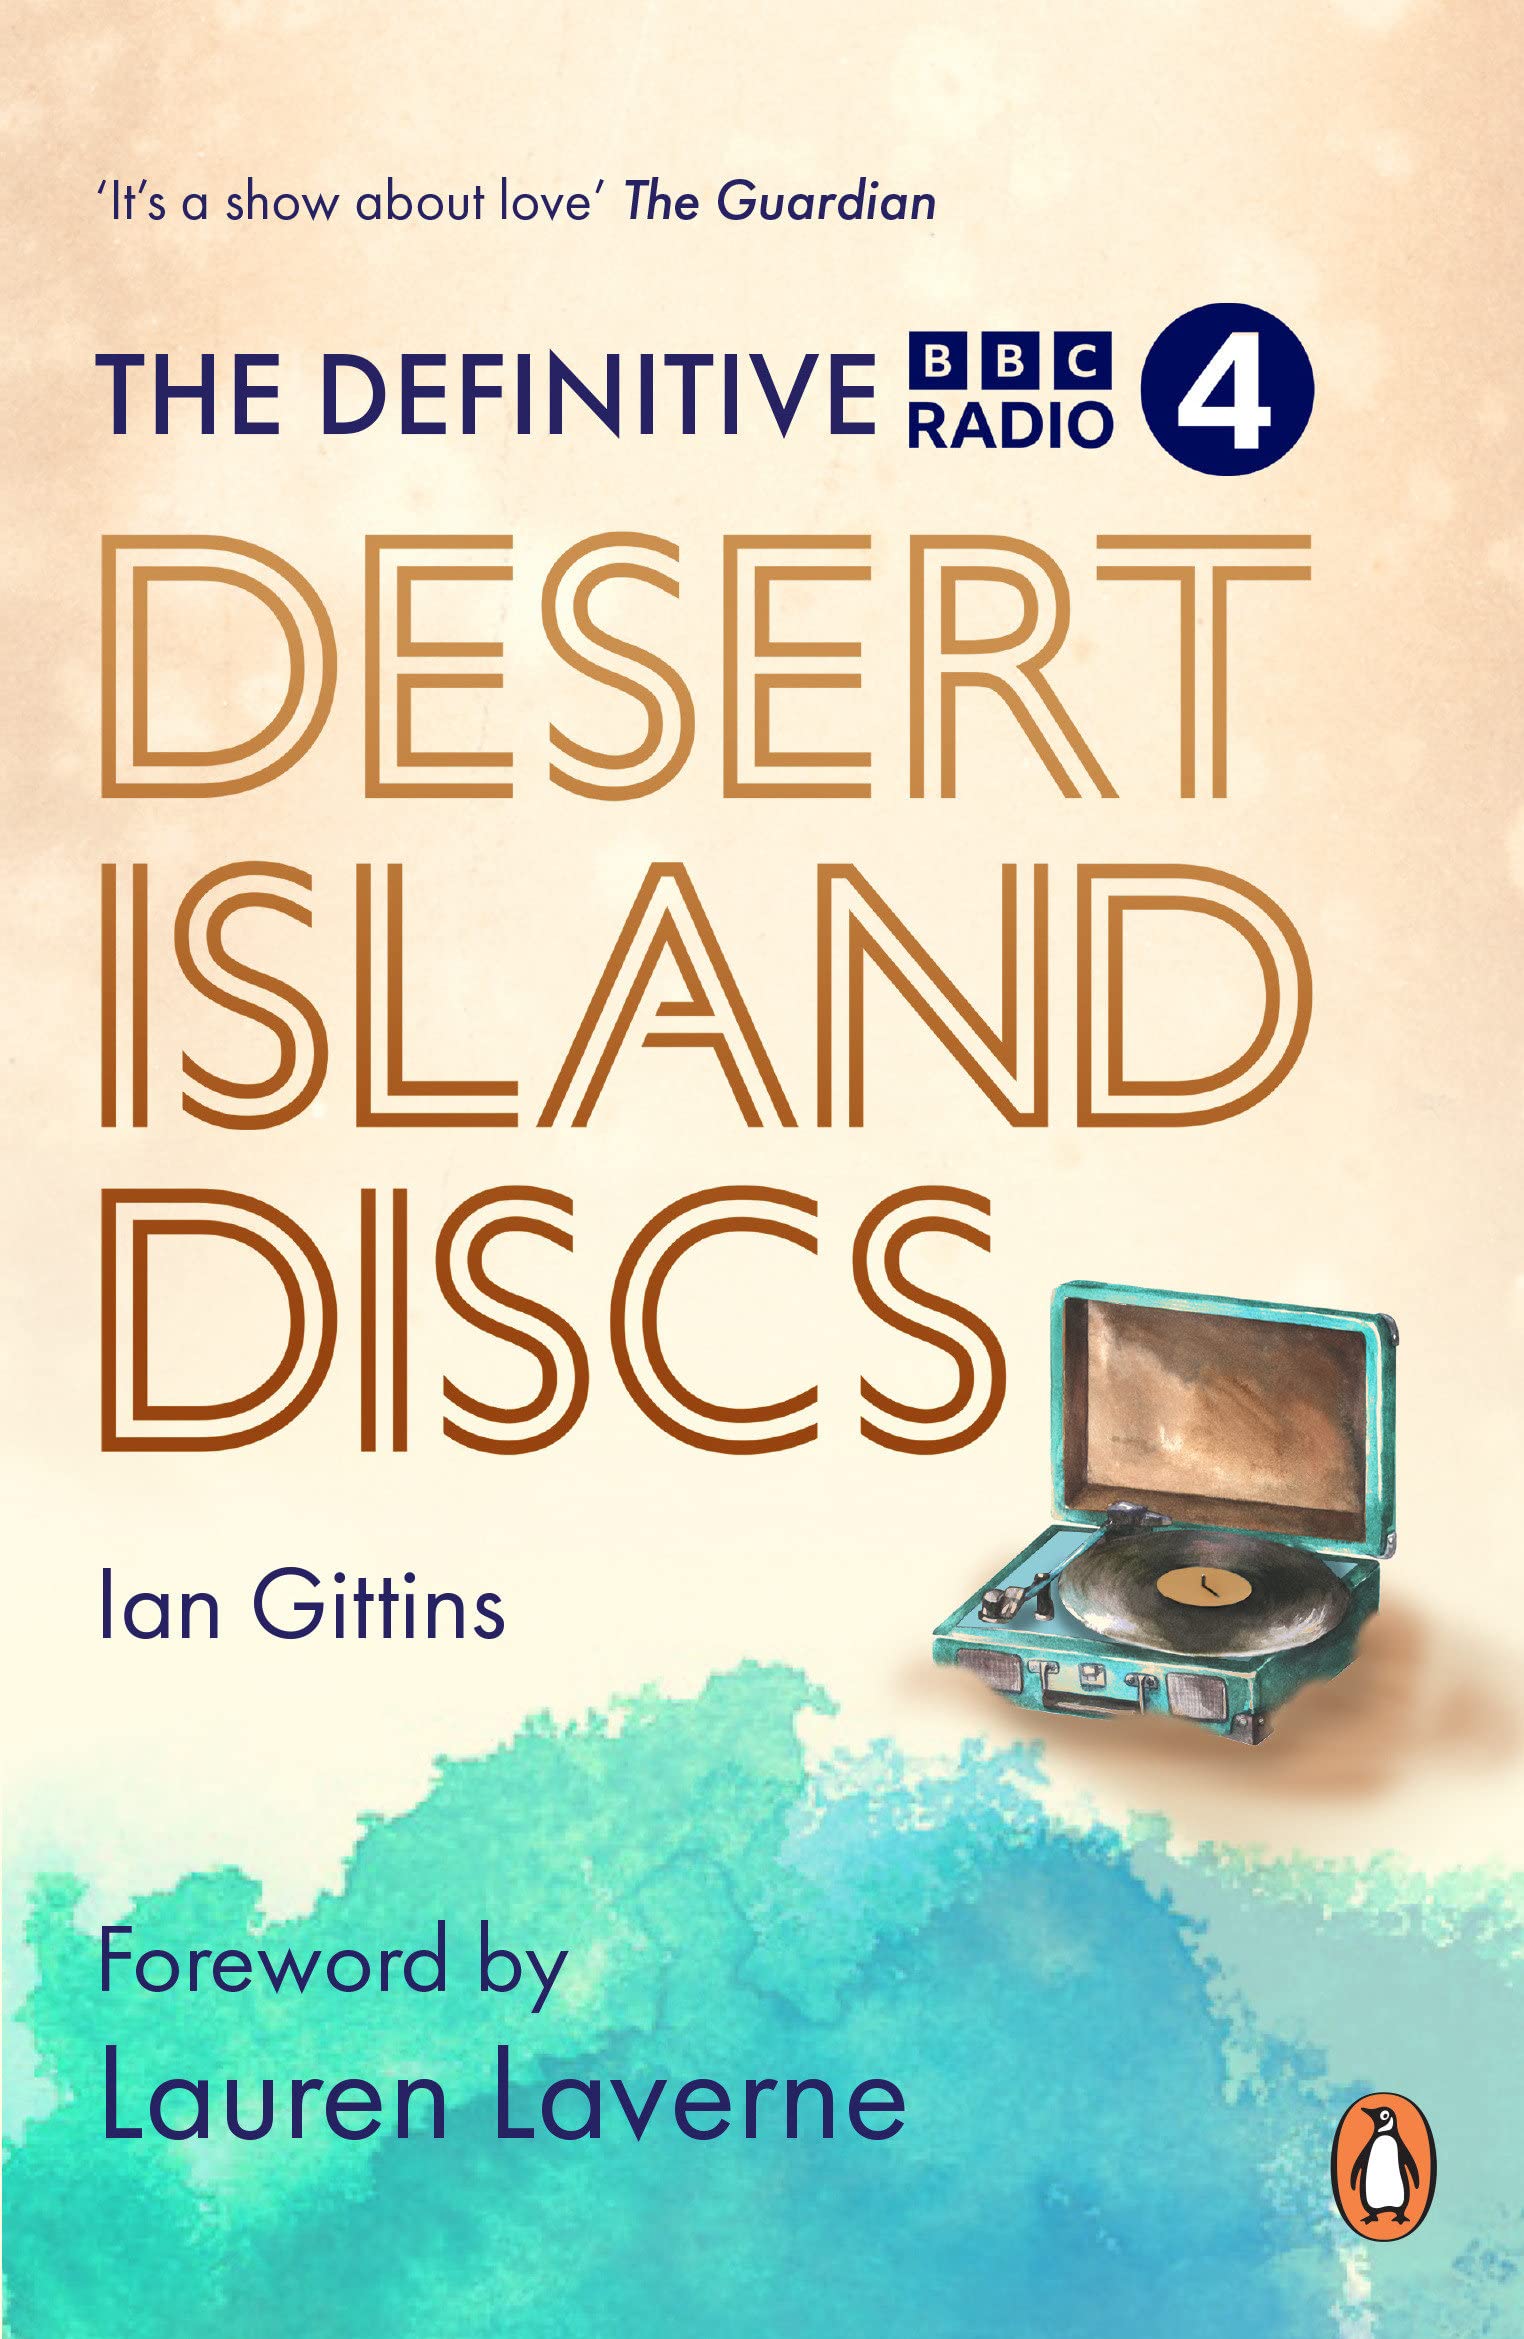 The_Definitive_Desert_Island_discs_book_front_cover.